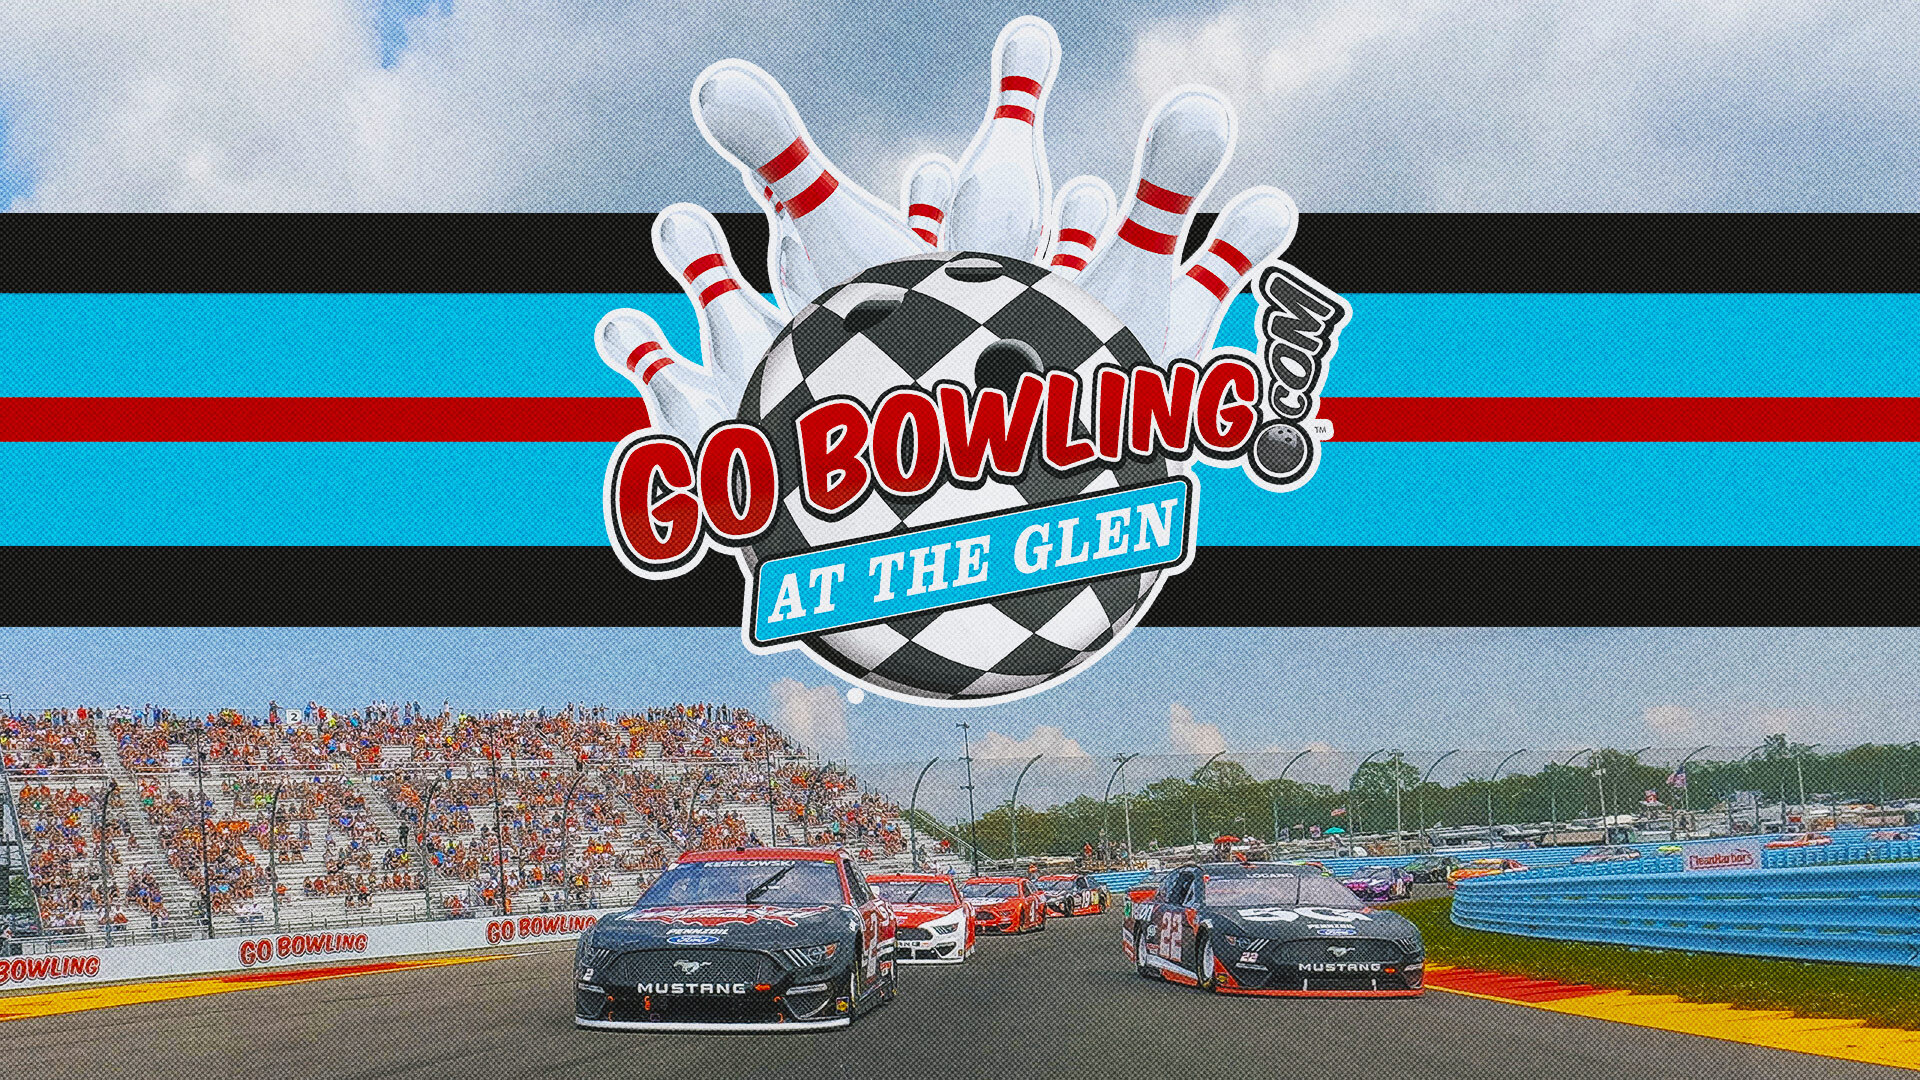 2022 Go Bowling at The Glen - August 21, 2022